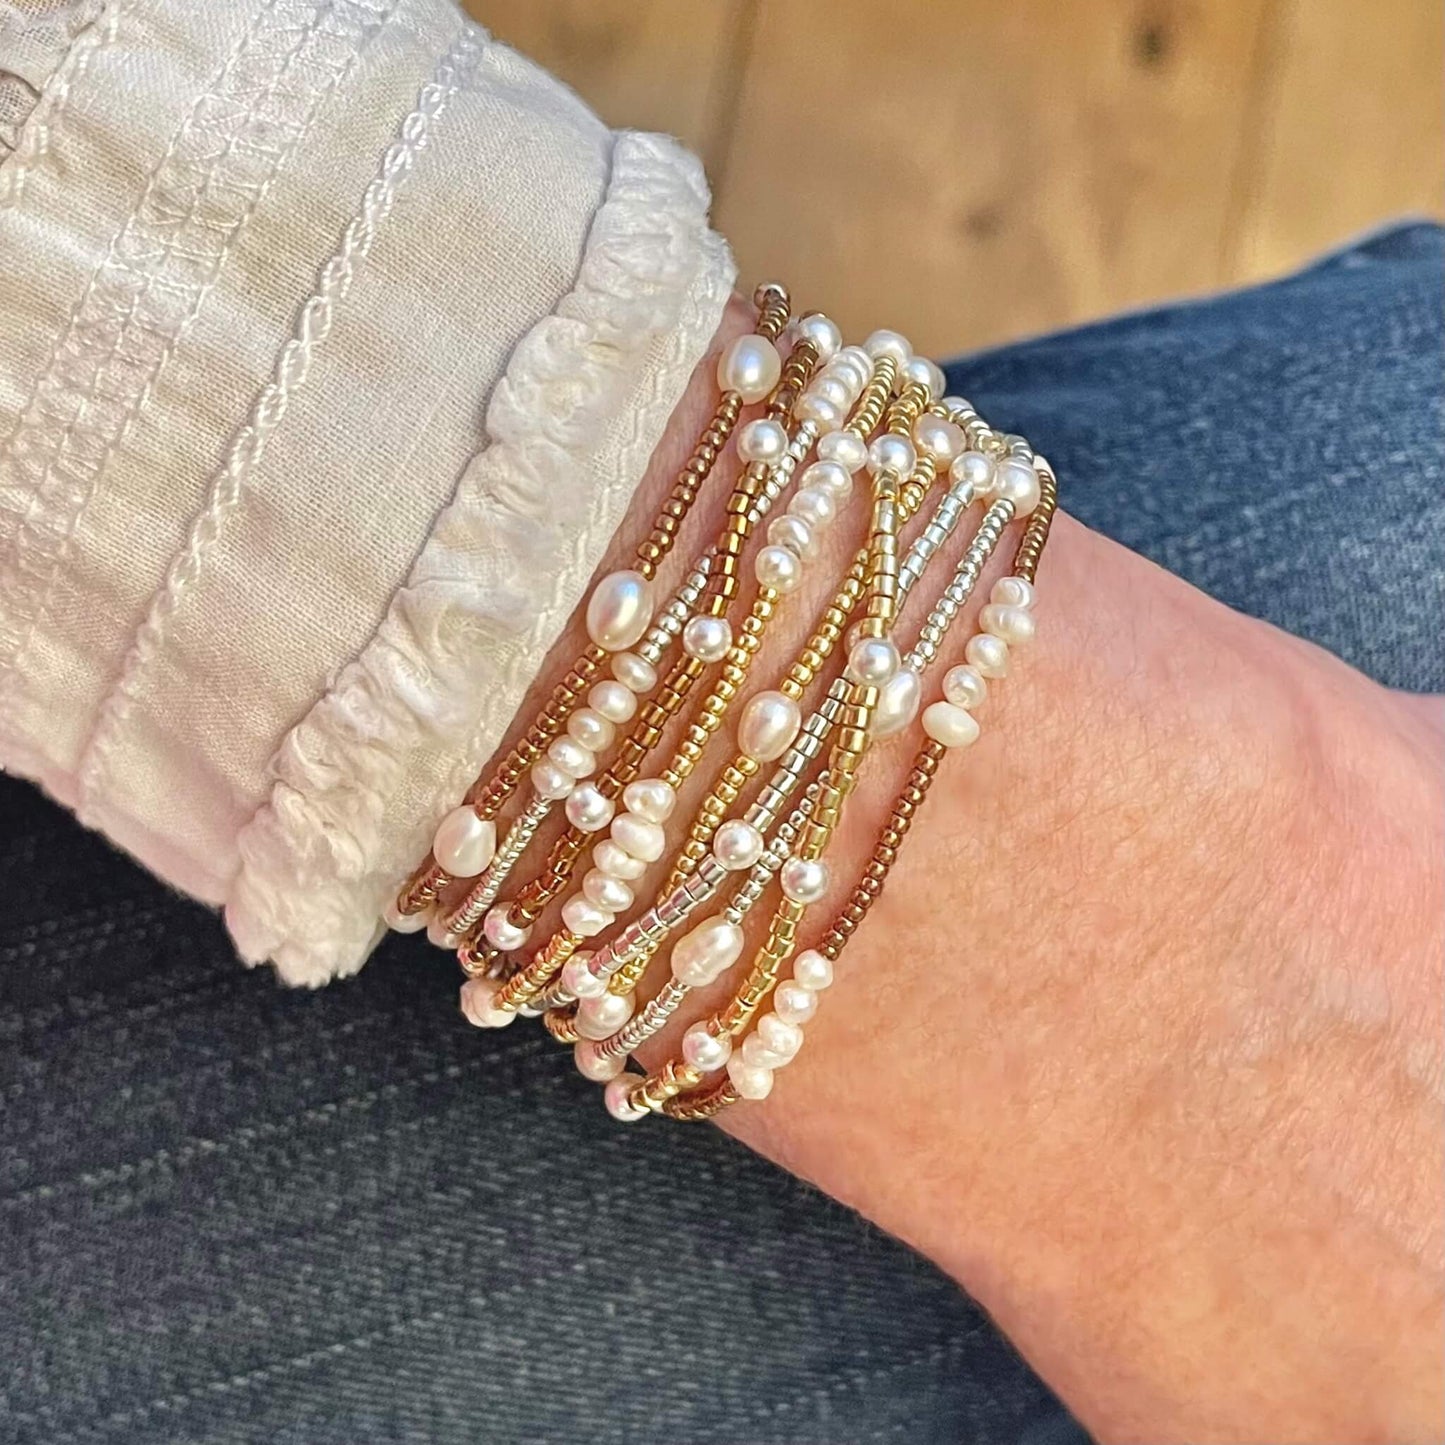 Mixed metal pearl beaded bracelets. Freshwater pearls and tiny rose gold, yellow gold, and silver seed beads. Dainty bracelet stack.